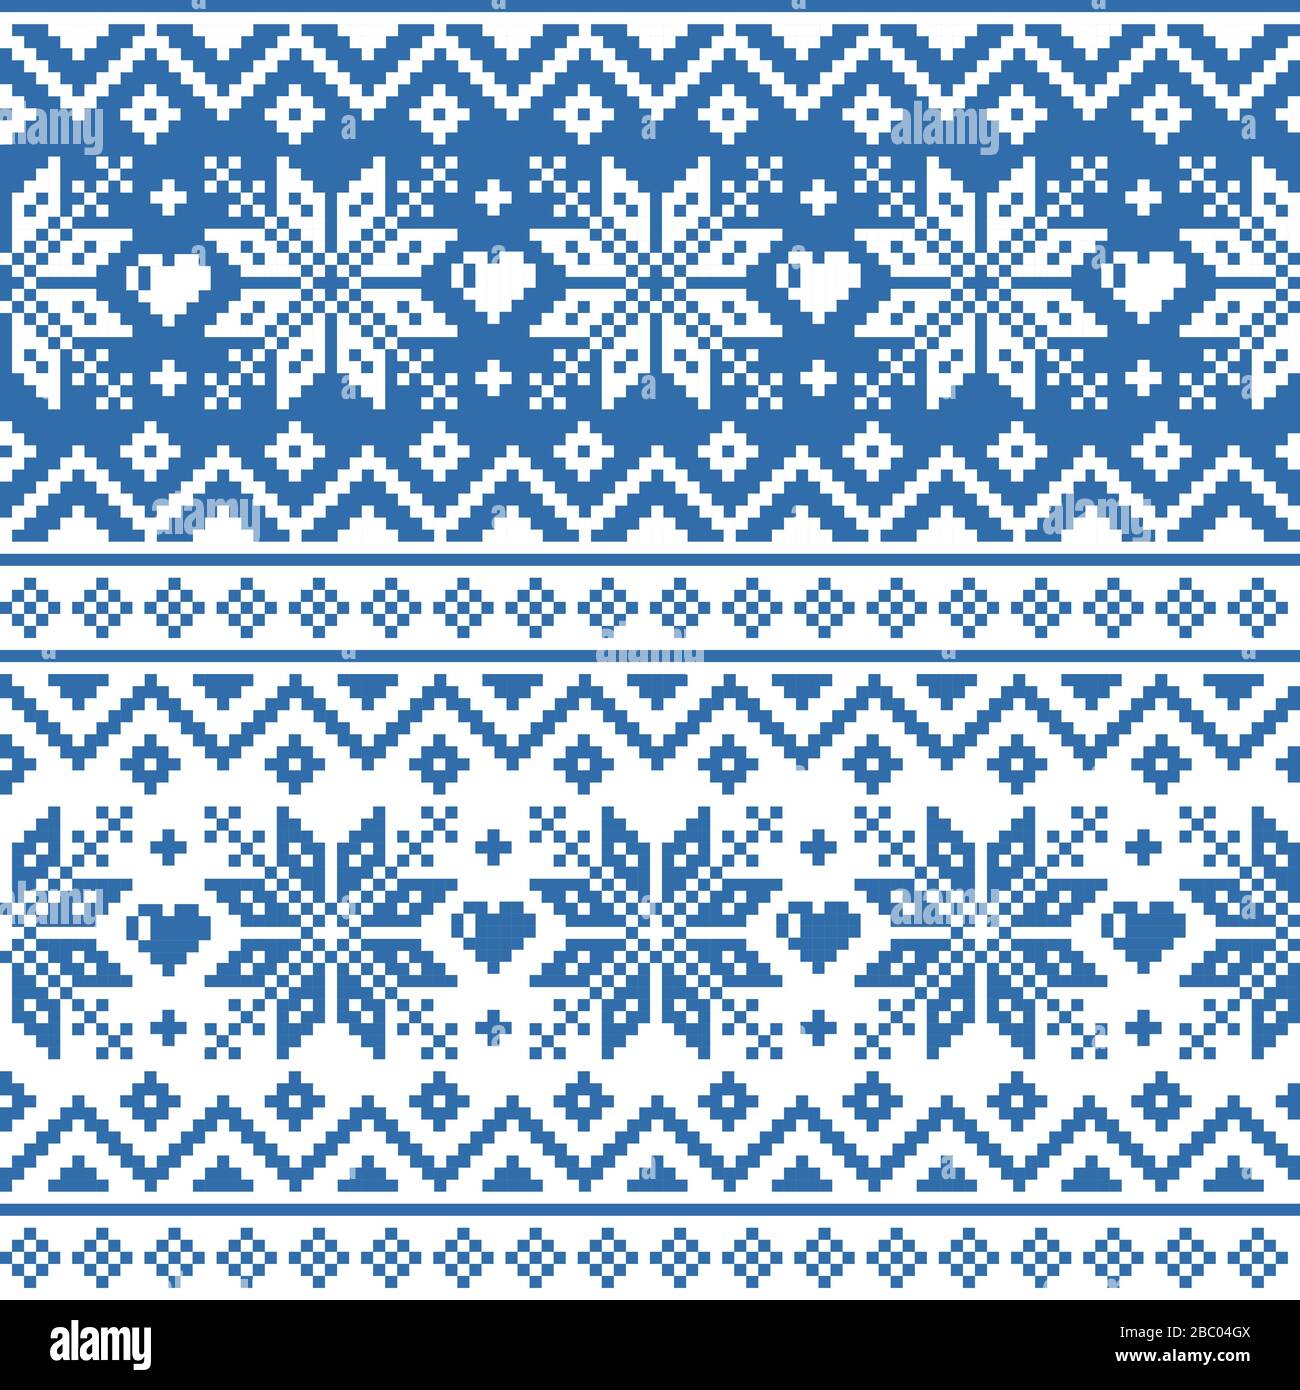 Winter, Christmas Fair Isle style traditional knitwear vector seamless geometric pattern with snowflakes, hearts Stock Vector